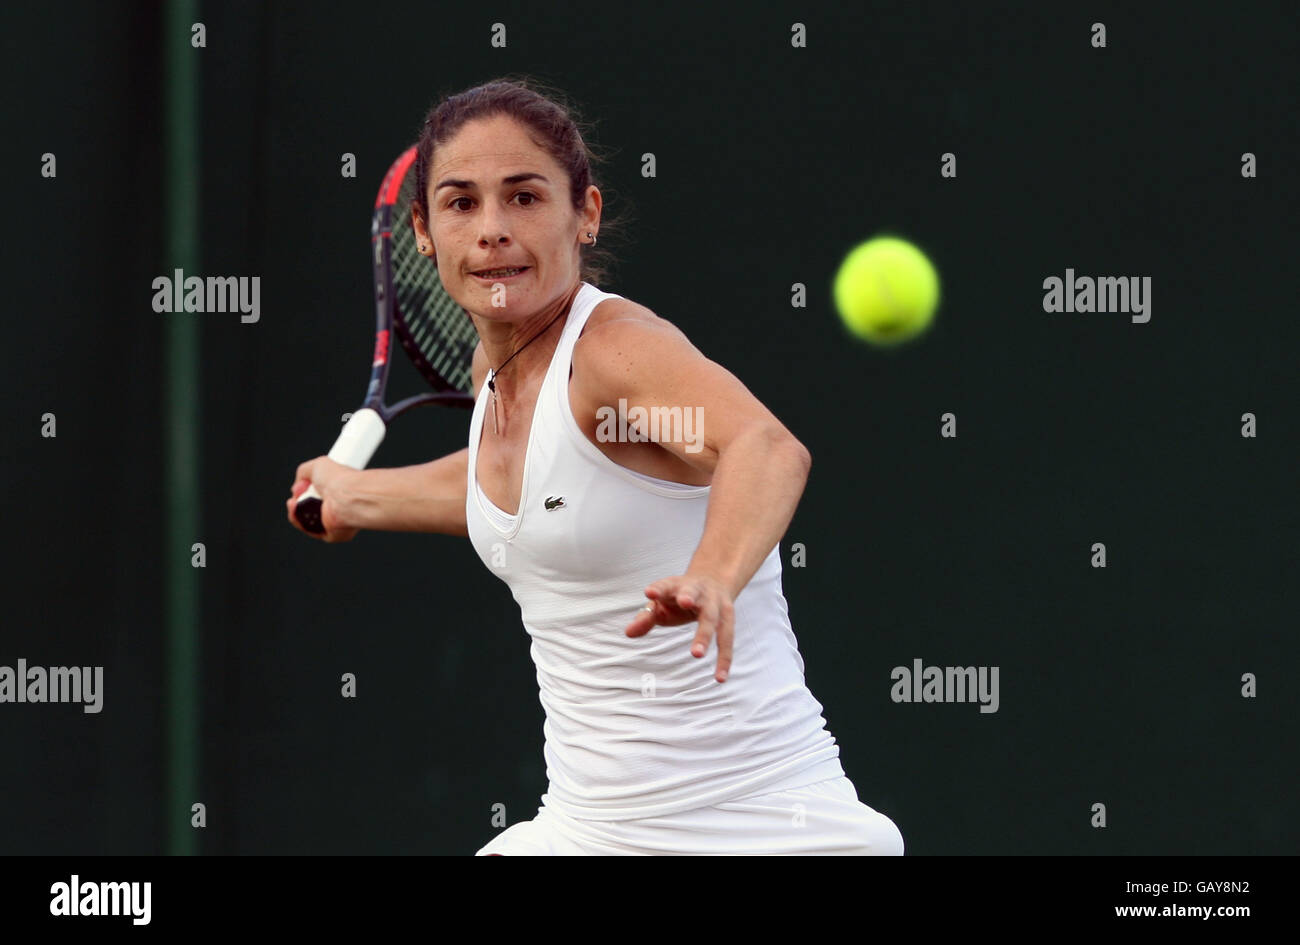 Virginia Ruano Pascual in action against Amelie Mauresmo Stock Photo